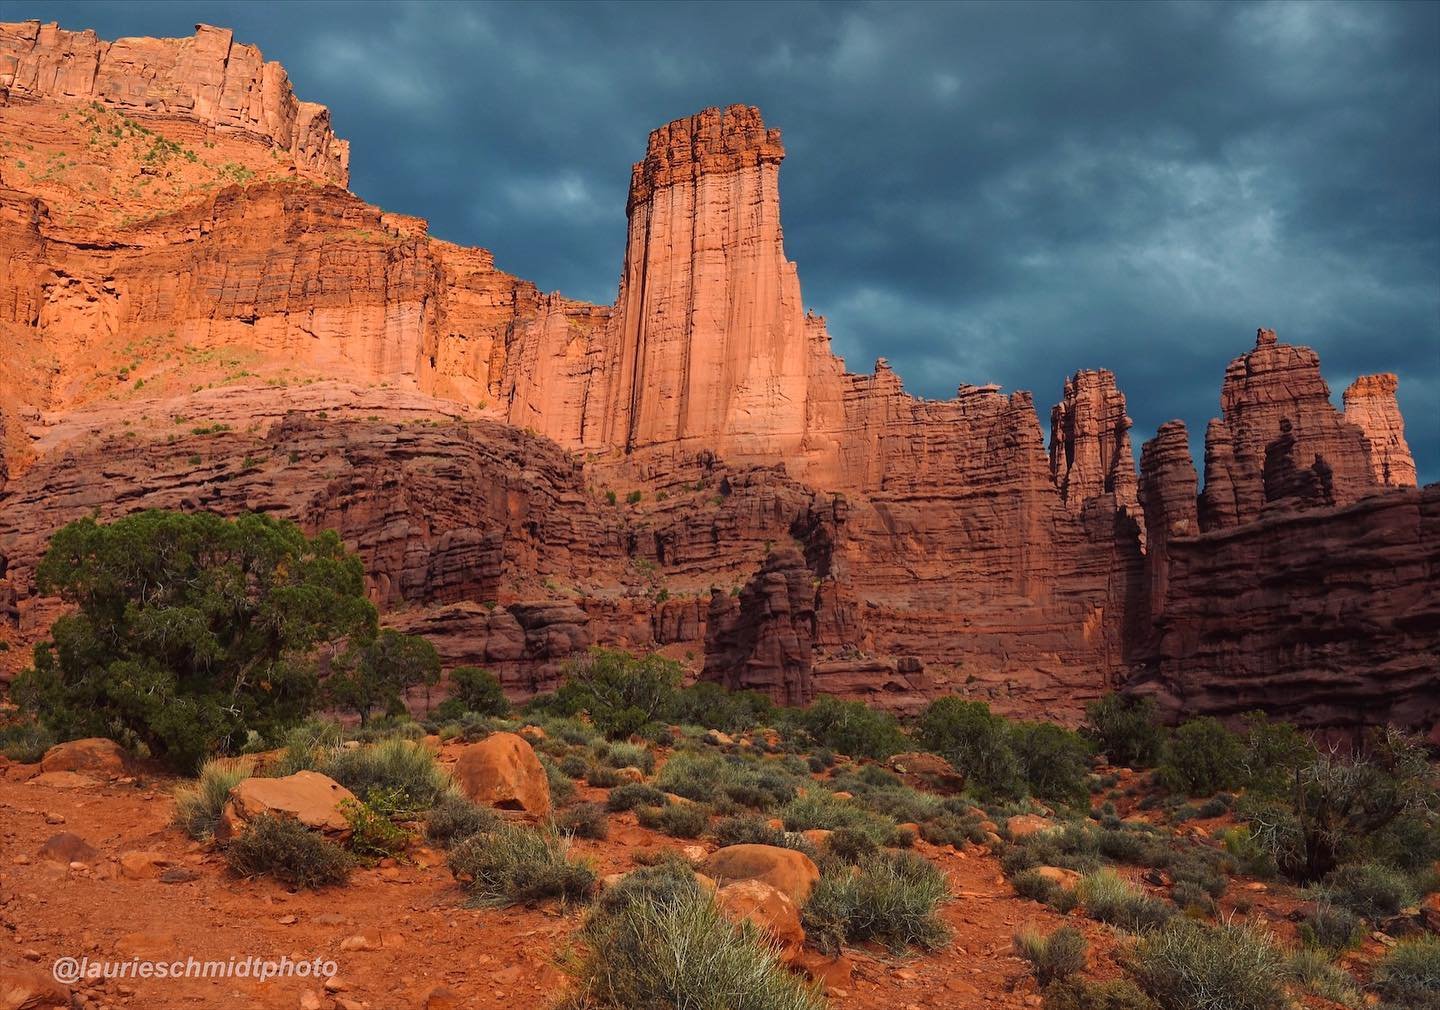 Painted Canyons of the West​